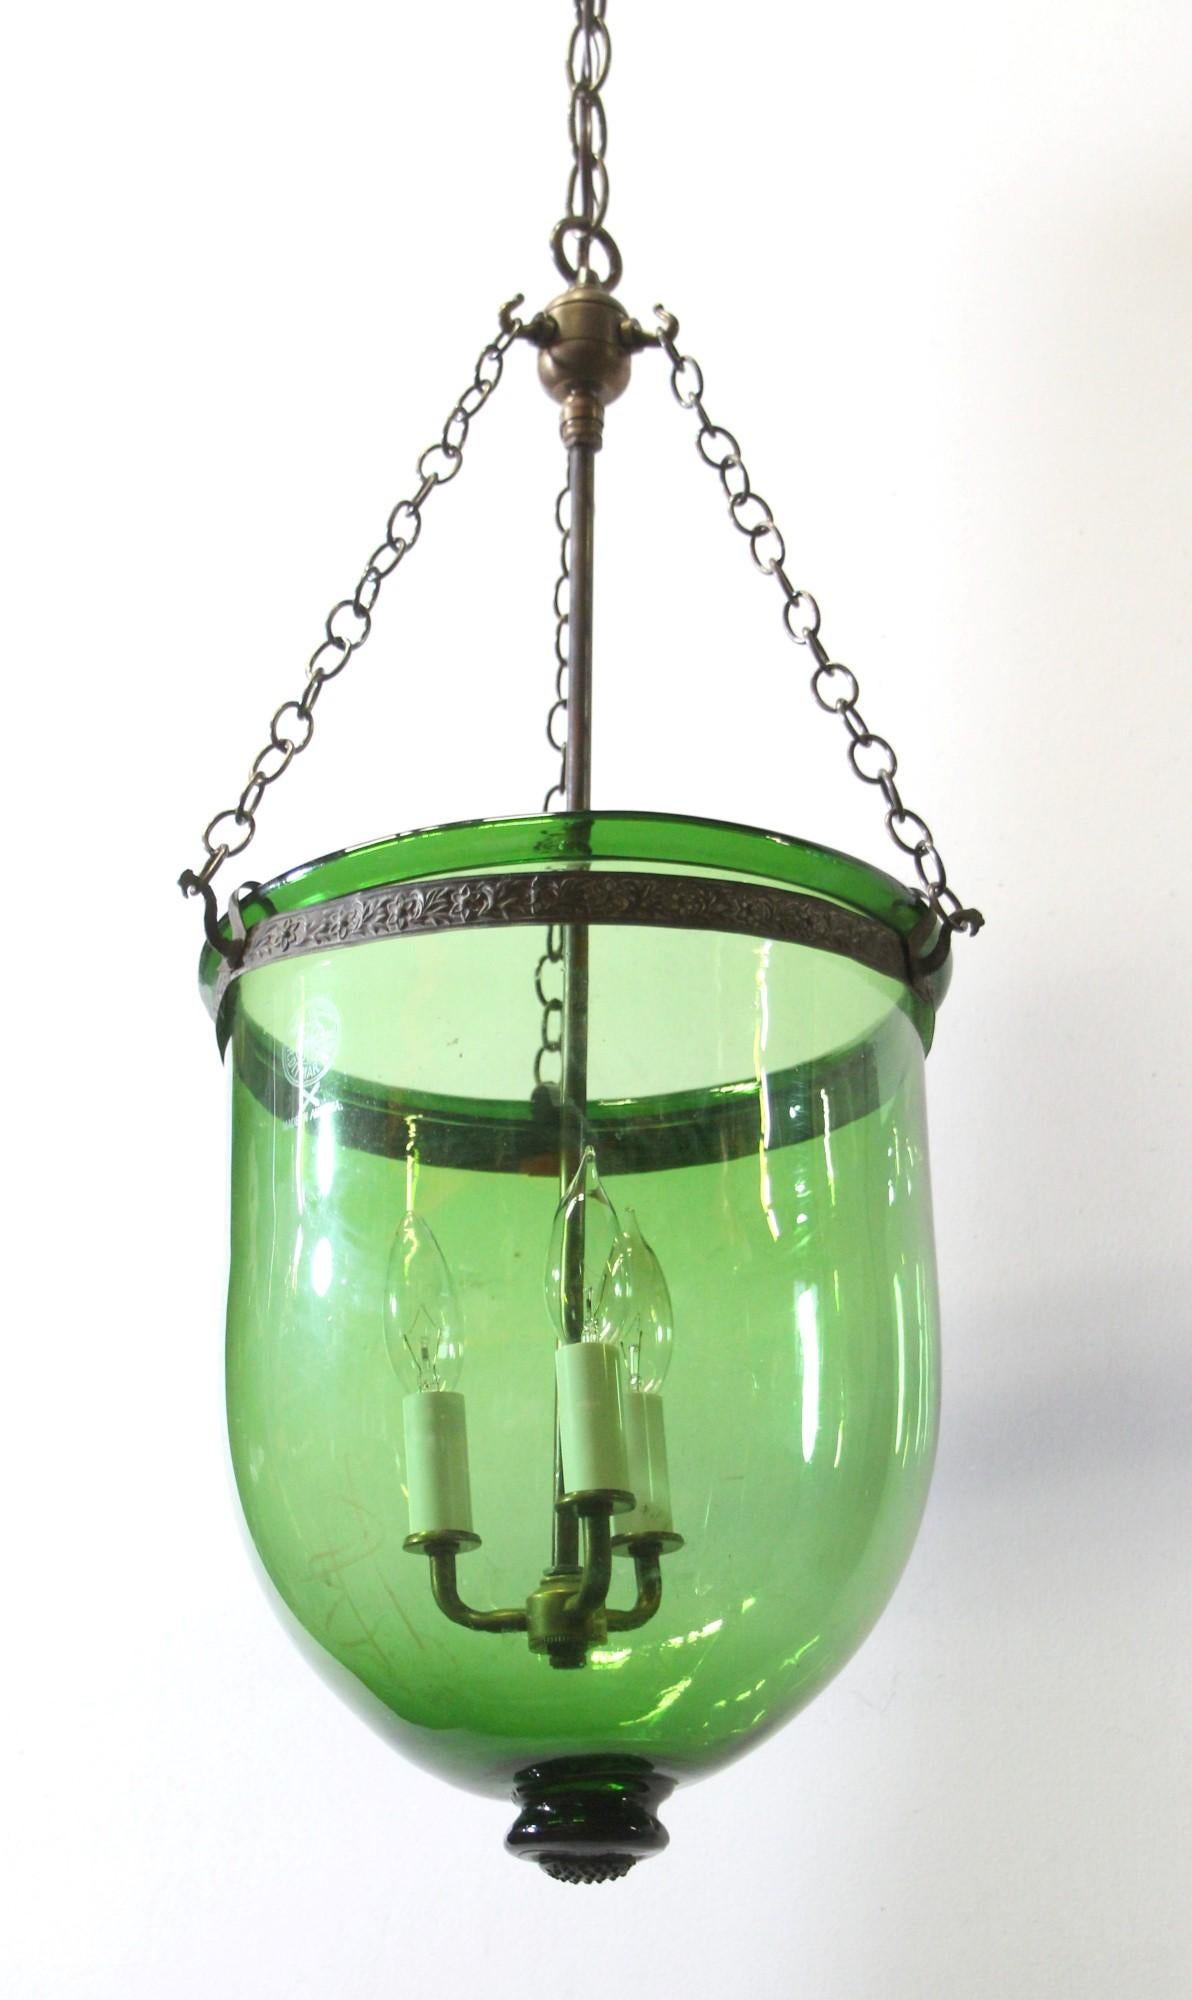 Antique cast green glass bell jar pendant light. Shade made in Austria and stamped 